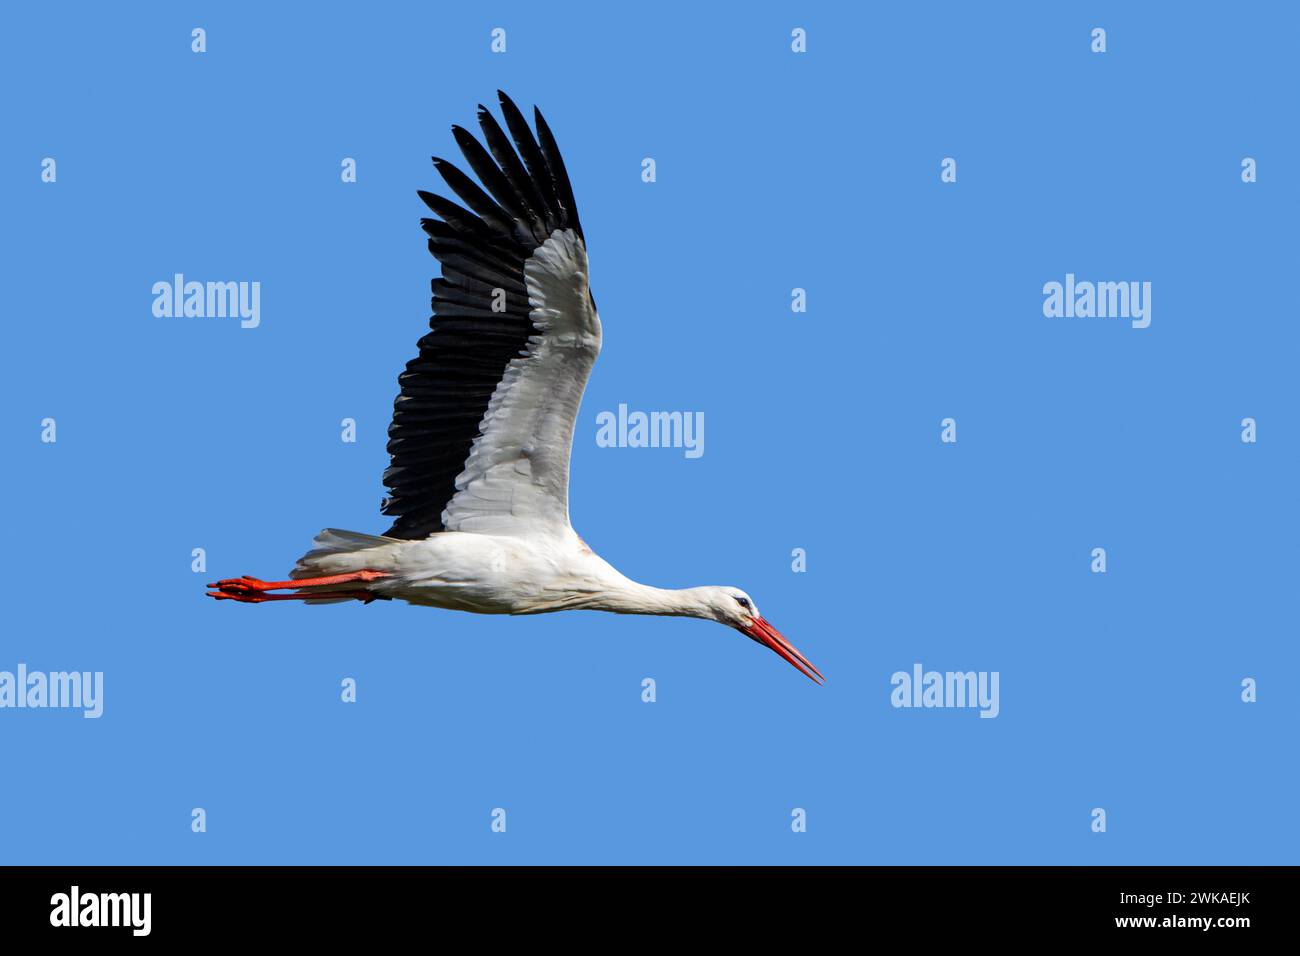 White stork (Ciconia ciconia) flying against blue sky during migration Stock Photo